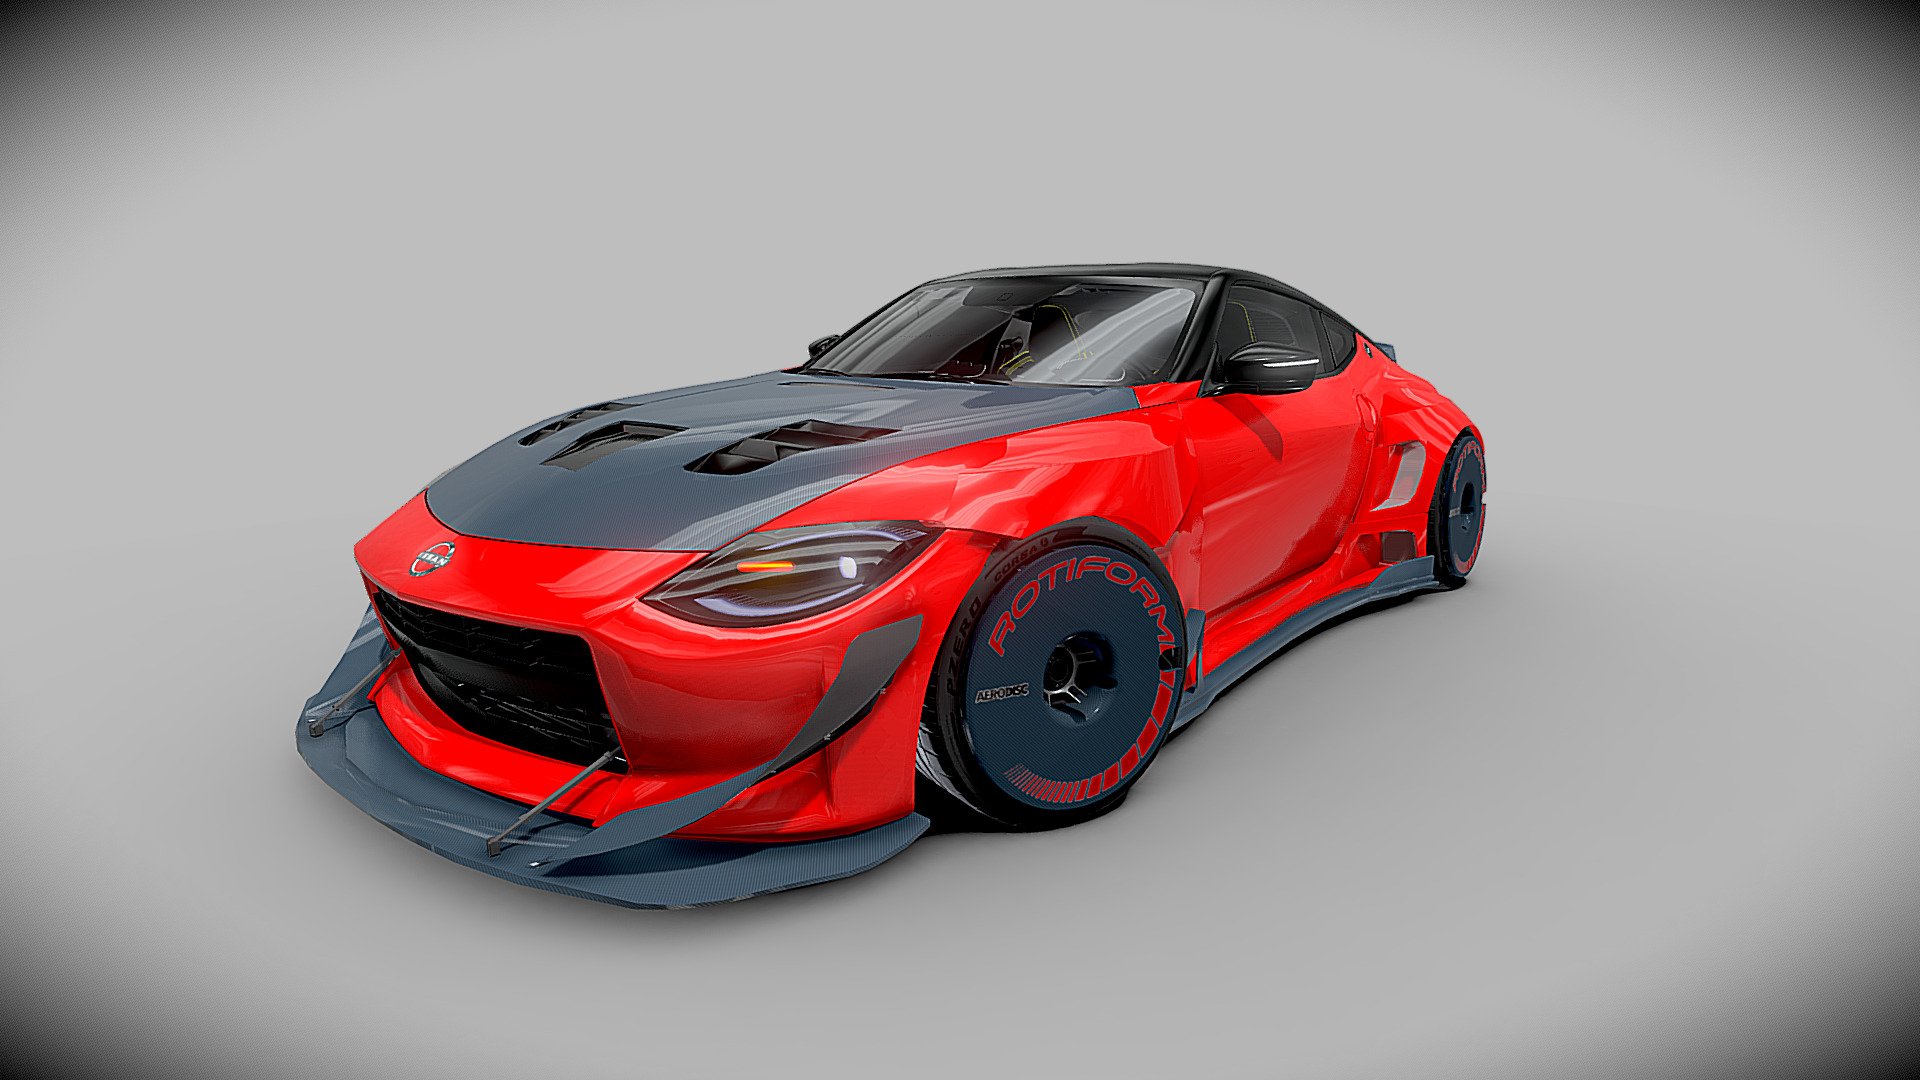 After this build i will be working on a 400z hycade bodykit edition - Nissan 400z - Variant - 3D model by OGL (@GaryLim) 3d model